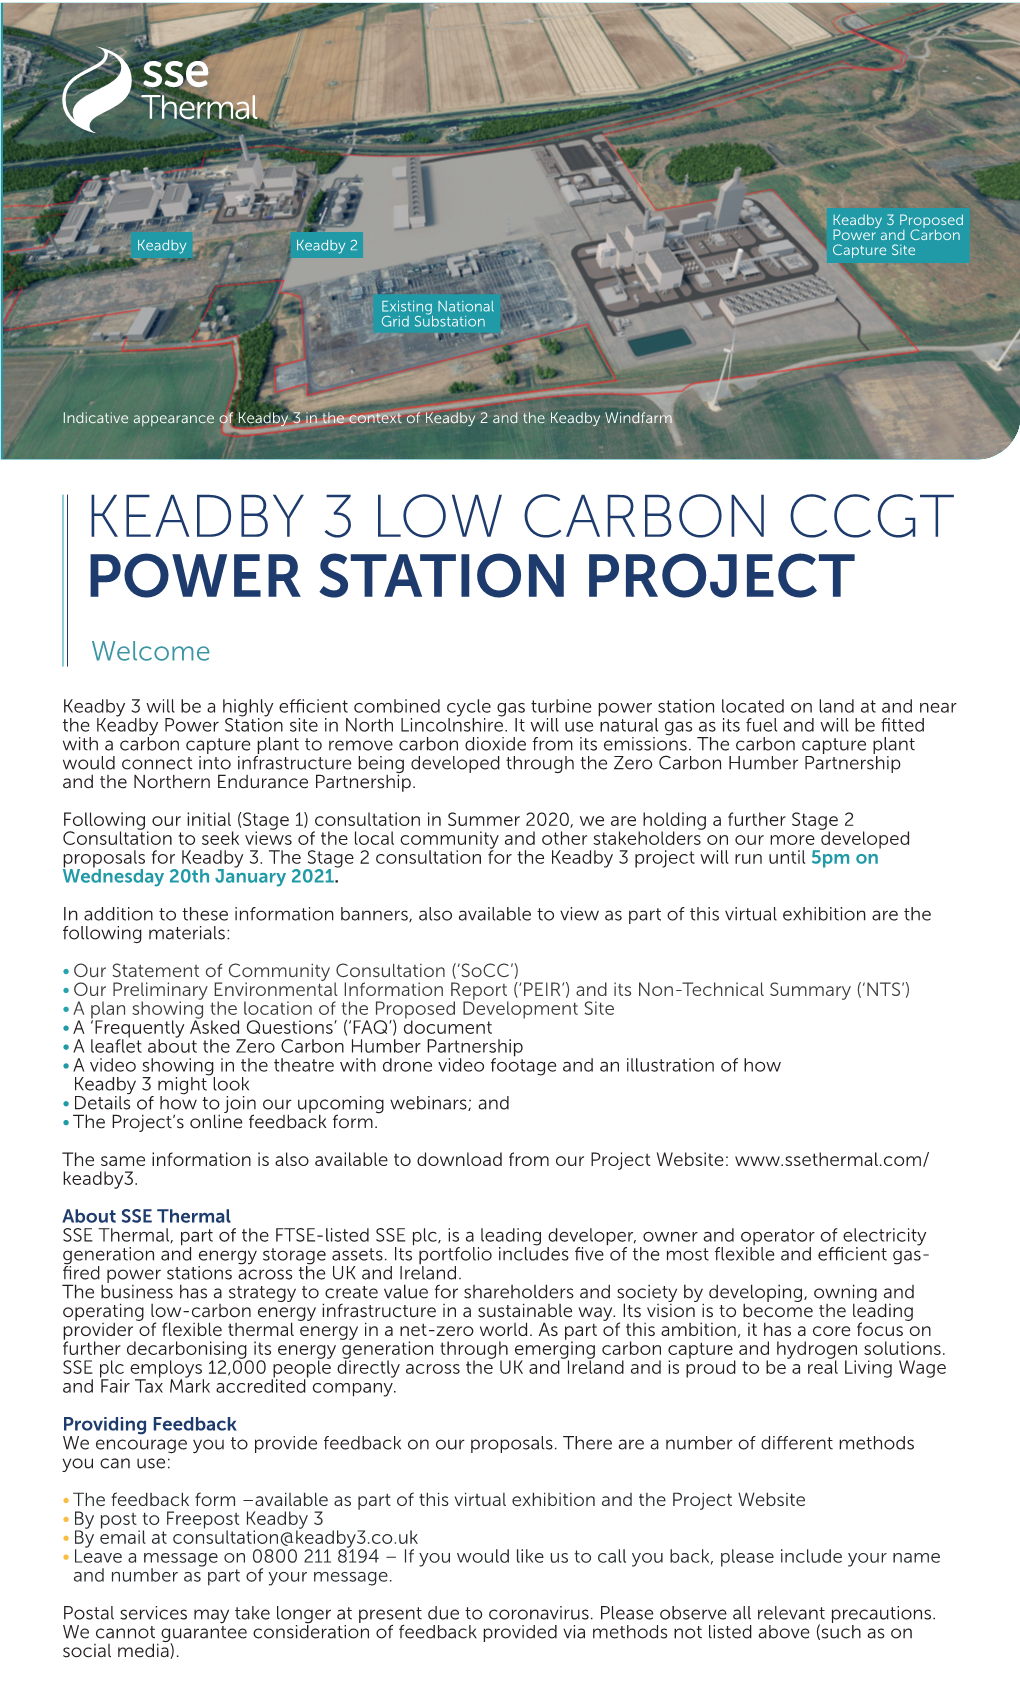 Keadby 3 Low Carbon Ccgt Power Station Project